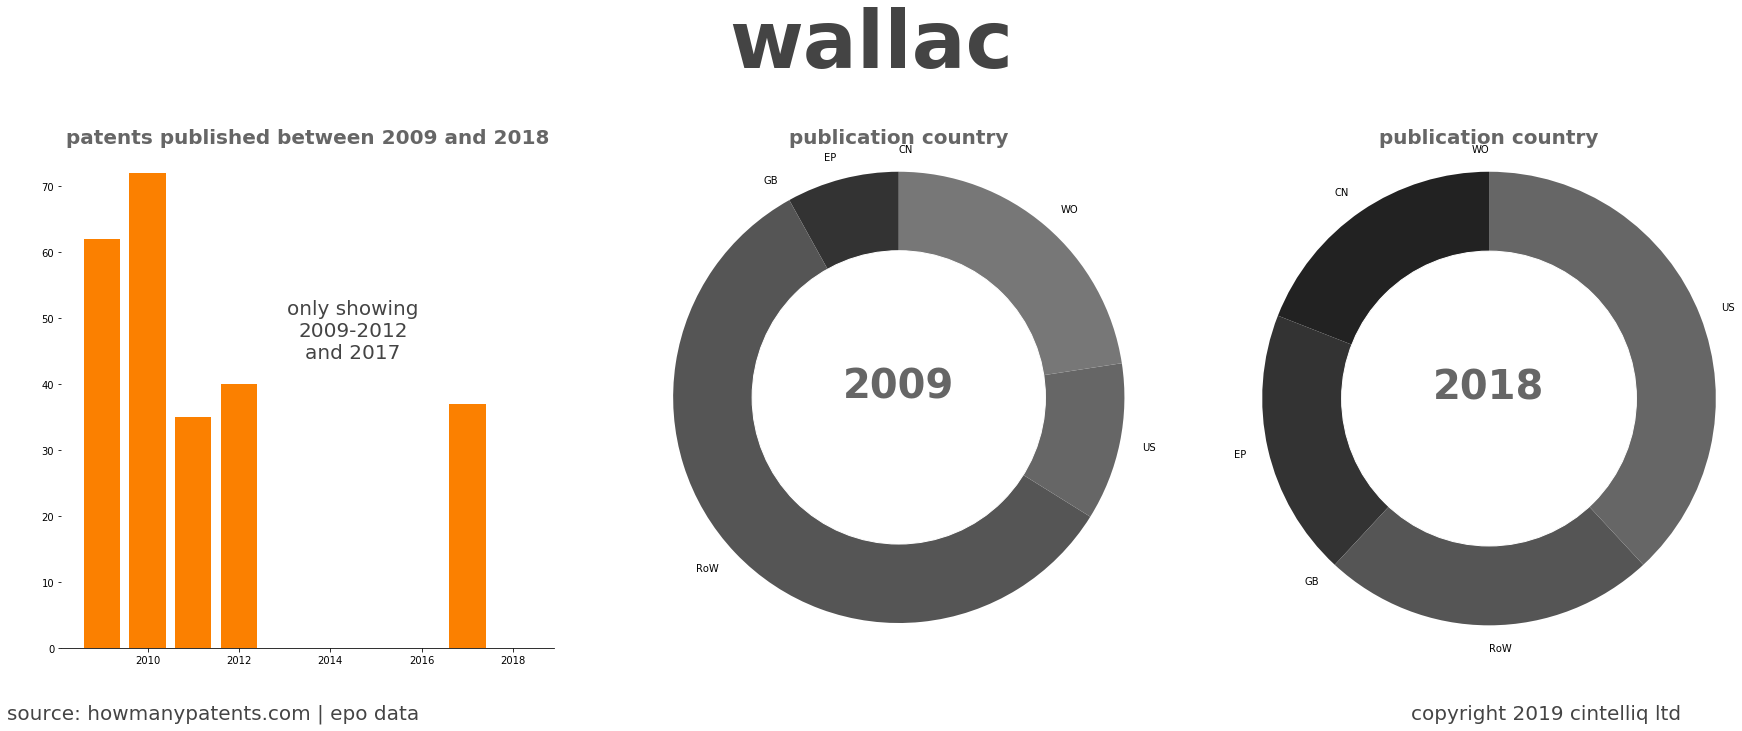 summary of patents for Wallac